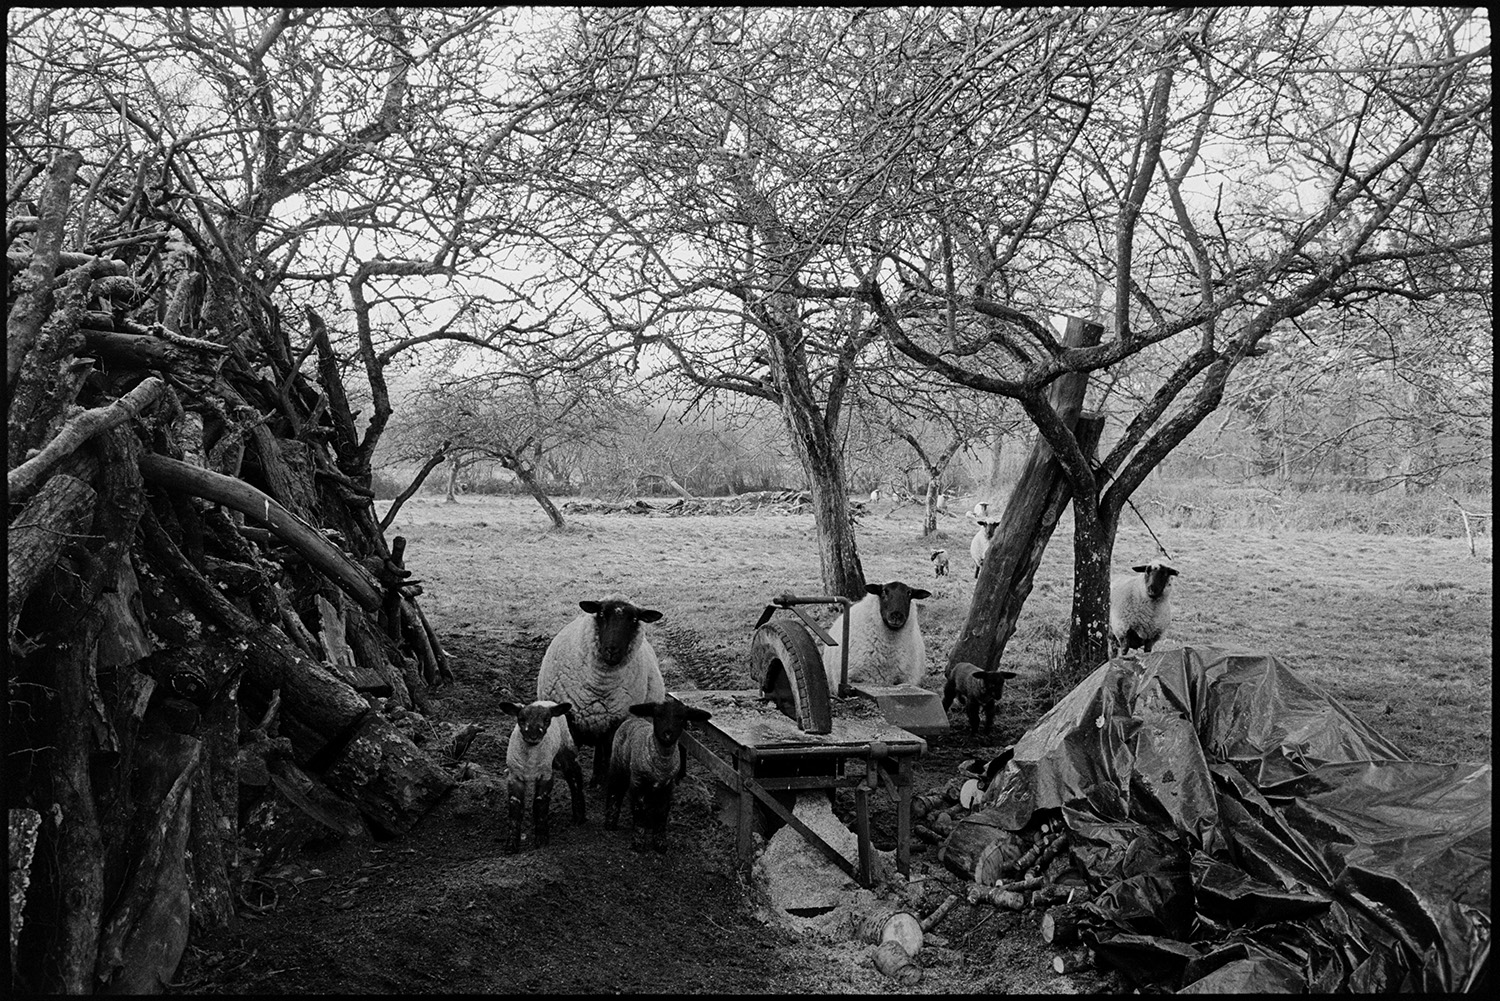 Sheep in orchard with logs and woodpile ,farmer feeding sheep. 
[Sheep and lambs by a circular saw, covered with a tyre, and a woodpile in an orchard at Middle Week, Iddesleigh.]